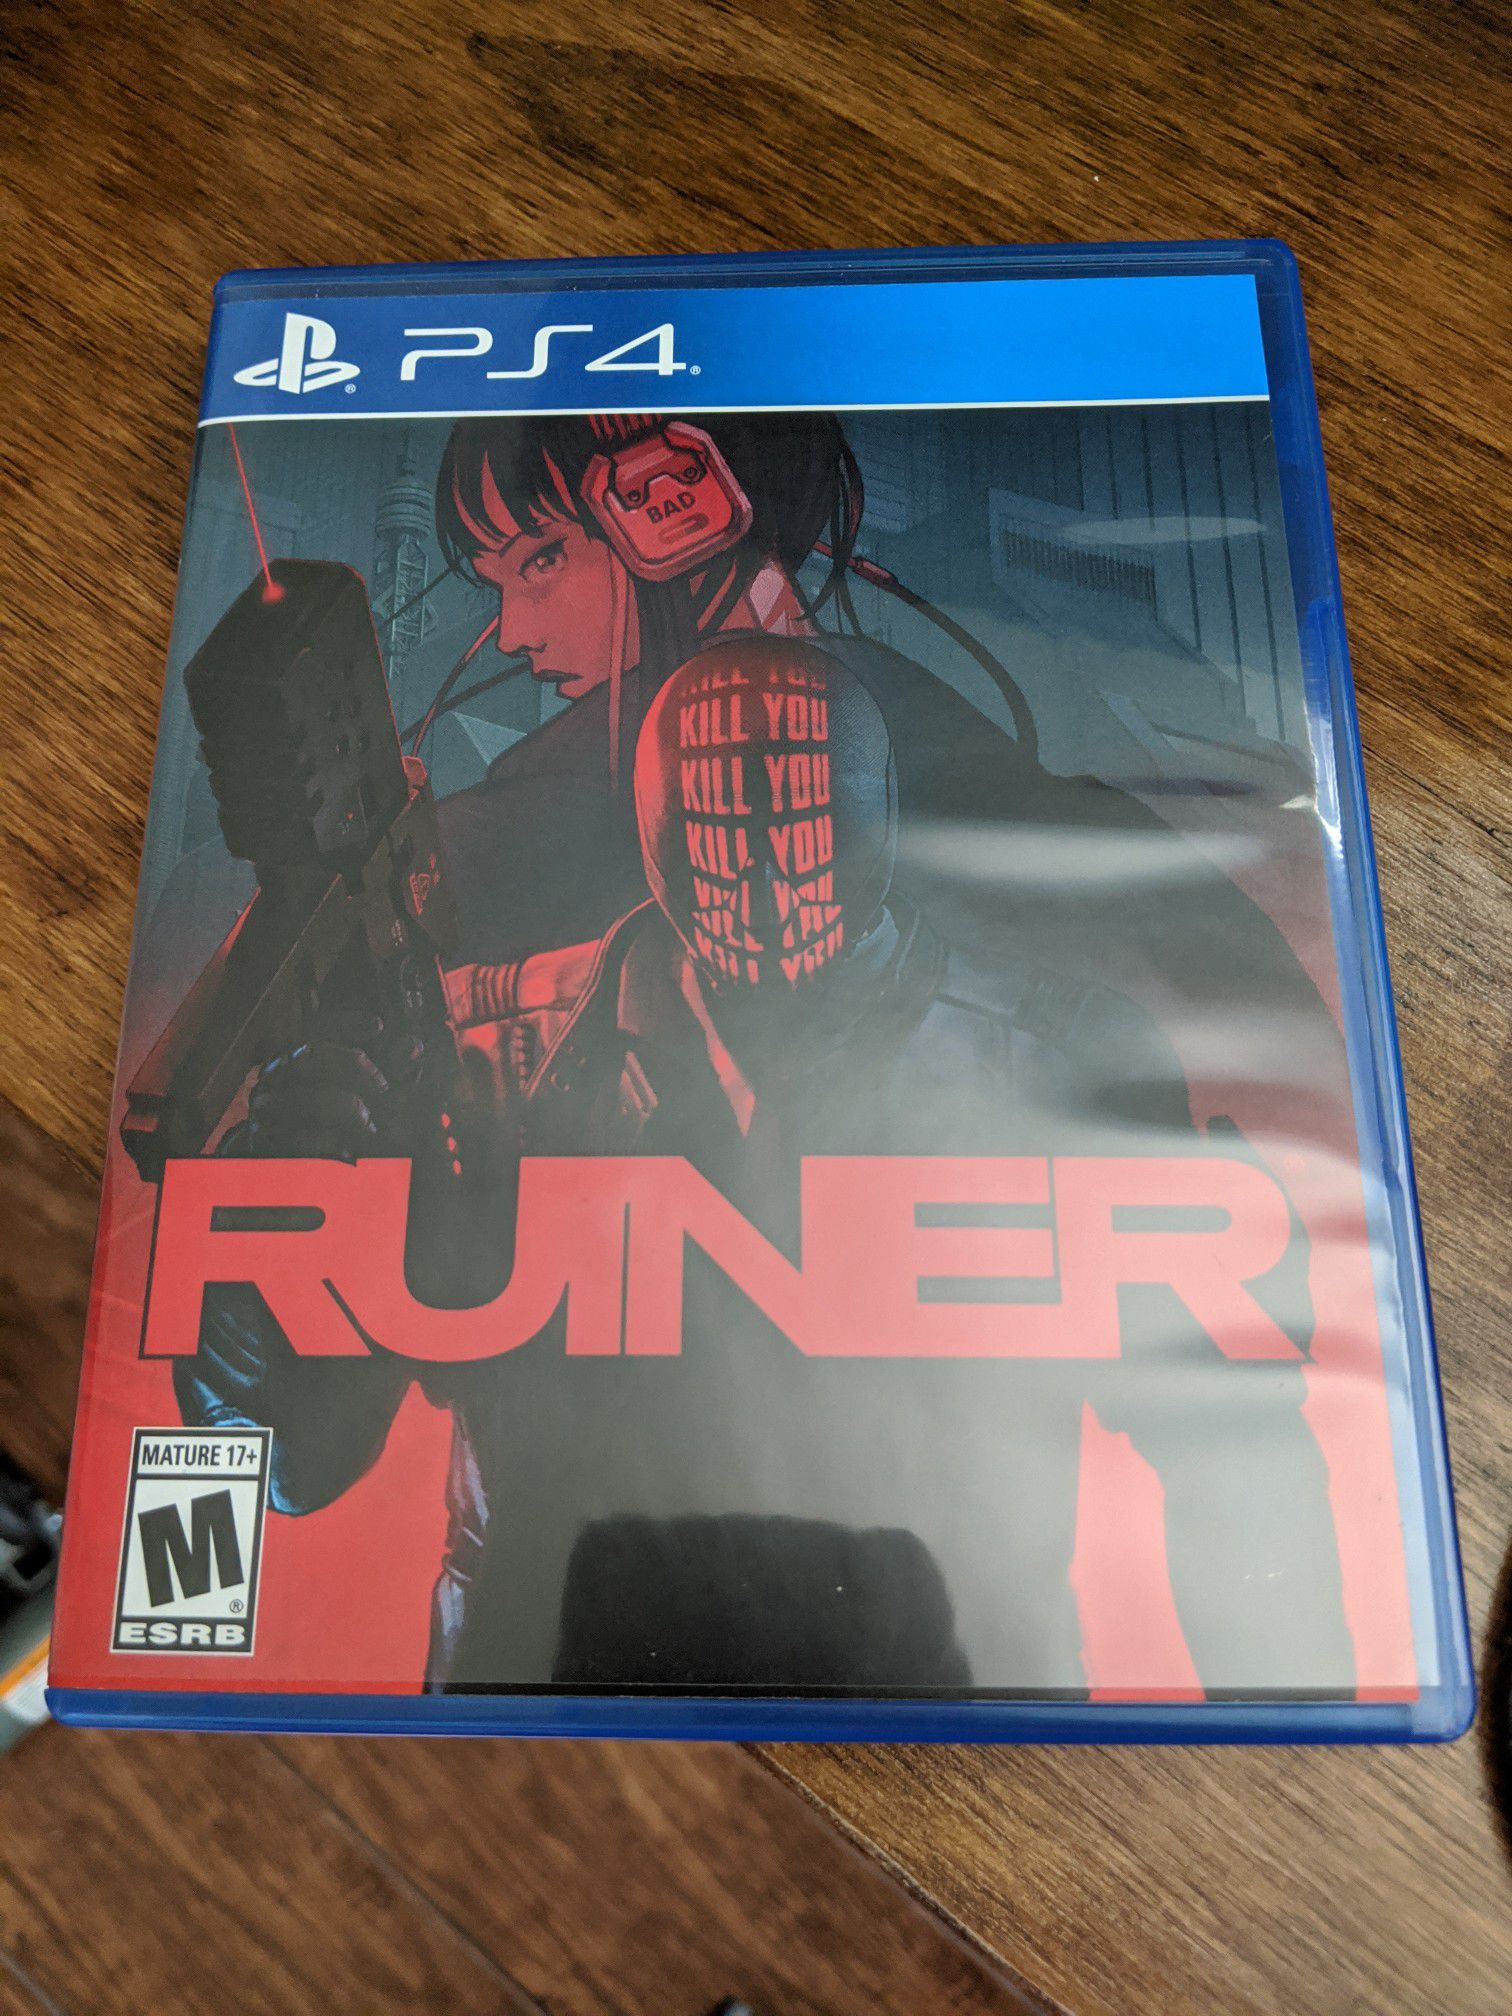 Ruiner PS4 physical copy - like new